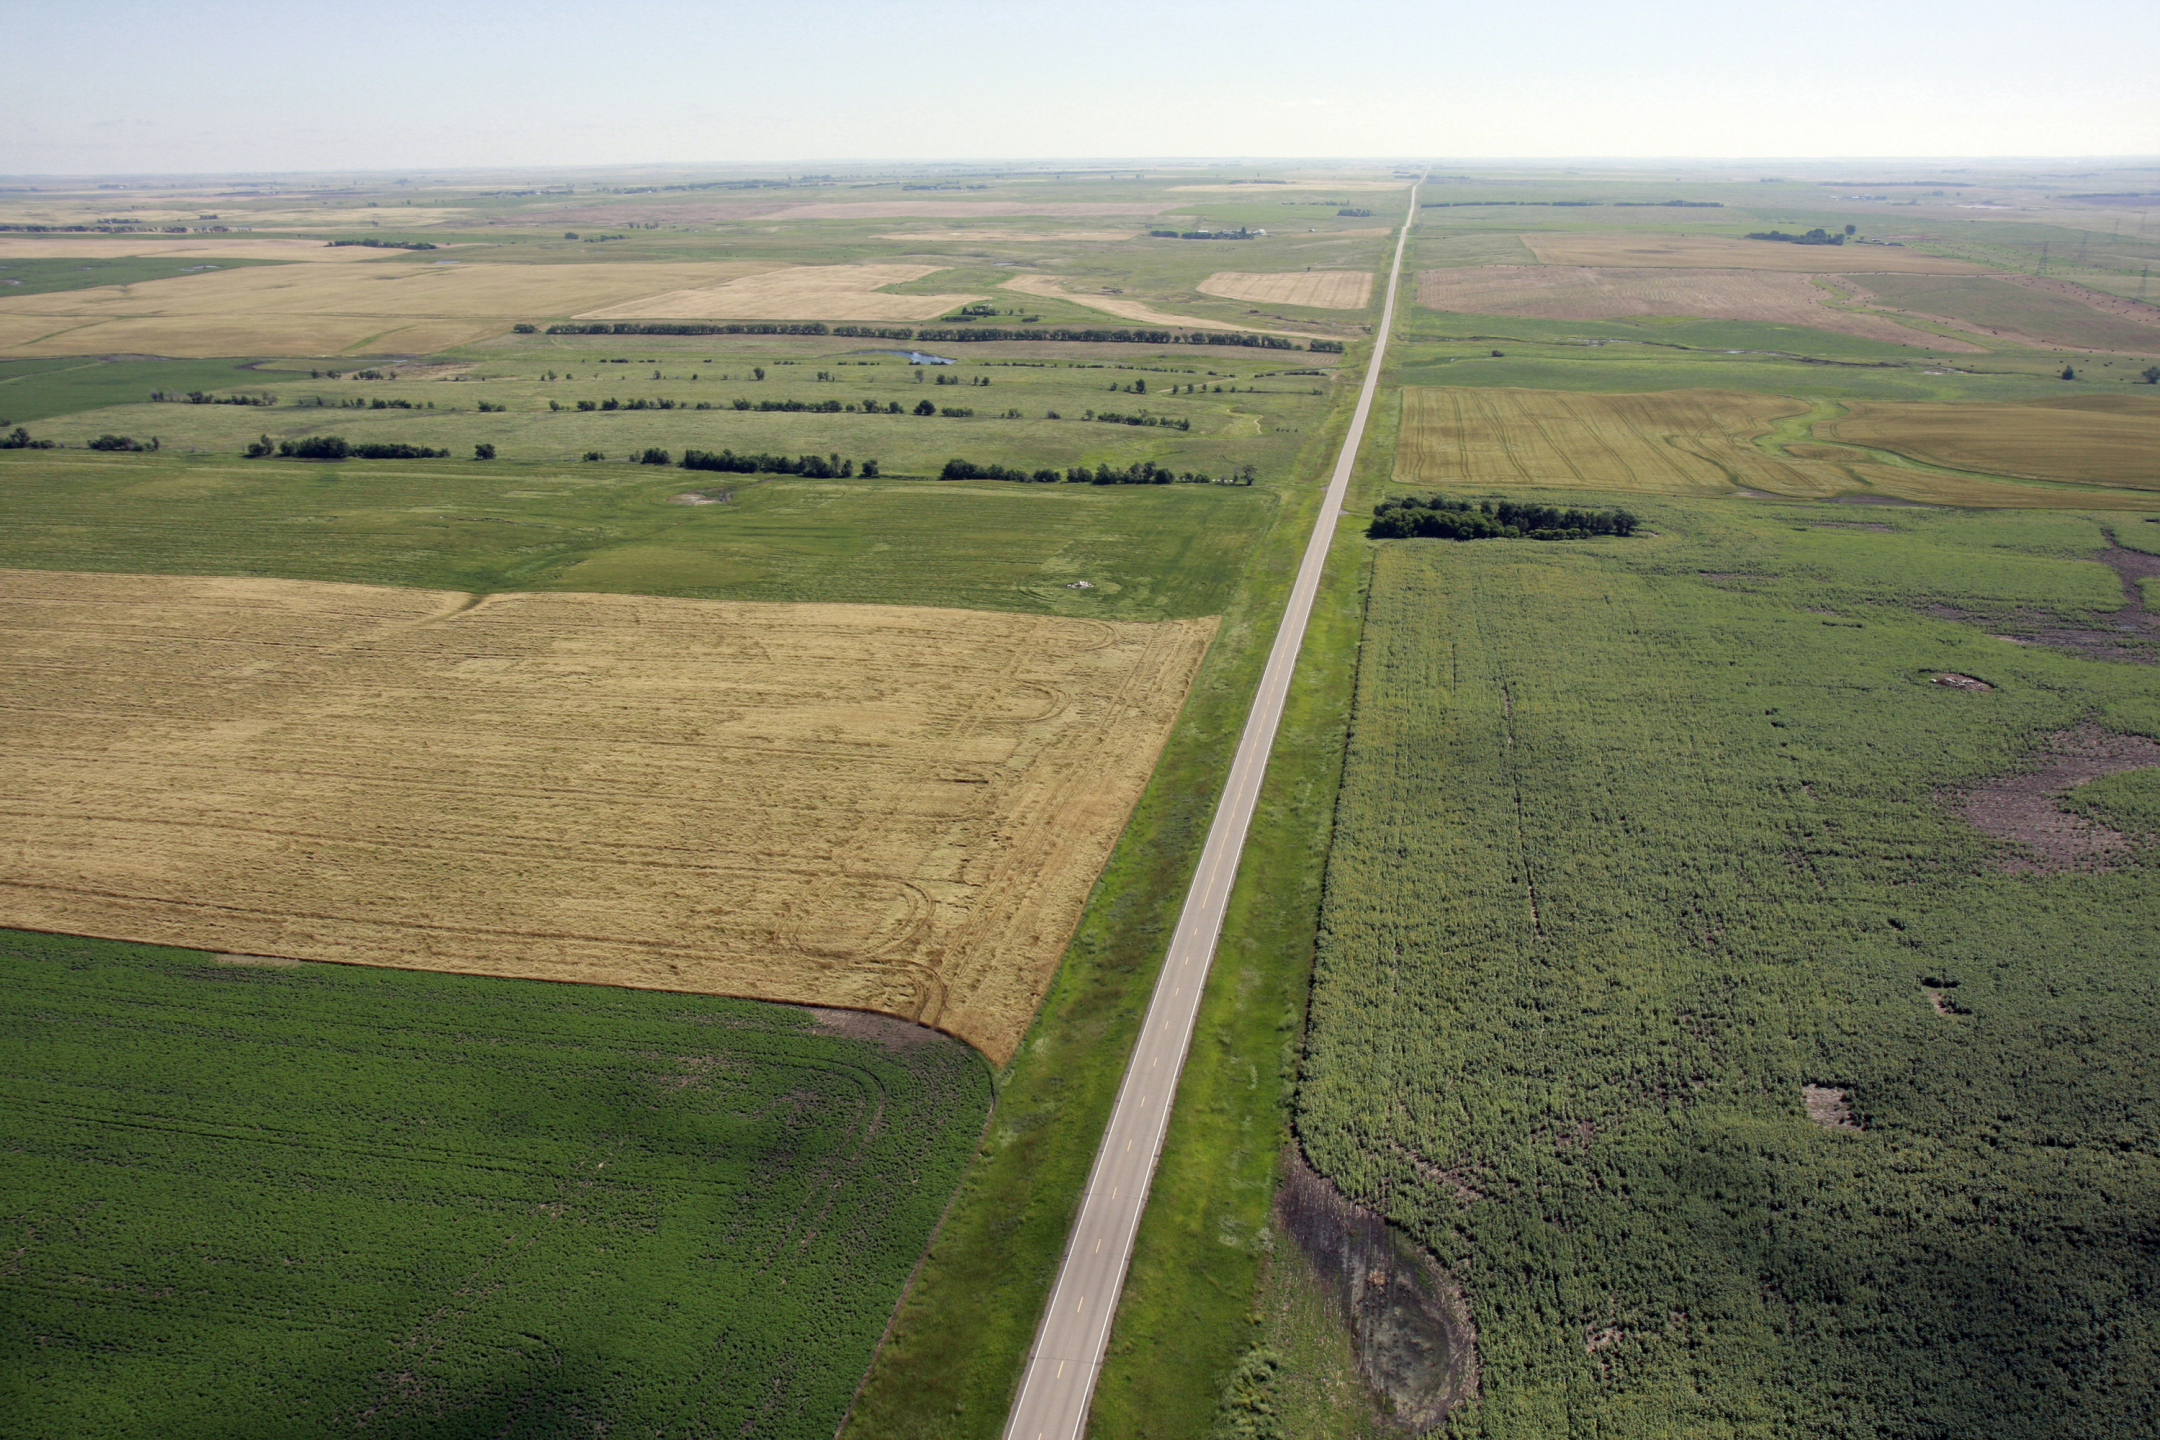 Photo of highway near agricultural fields in North Dakota